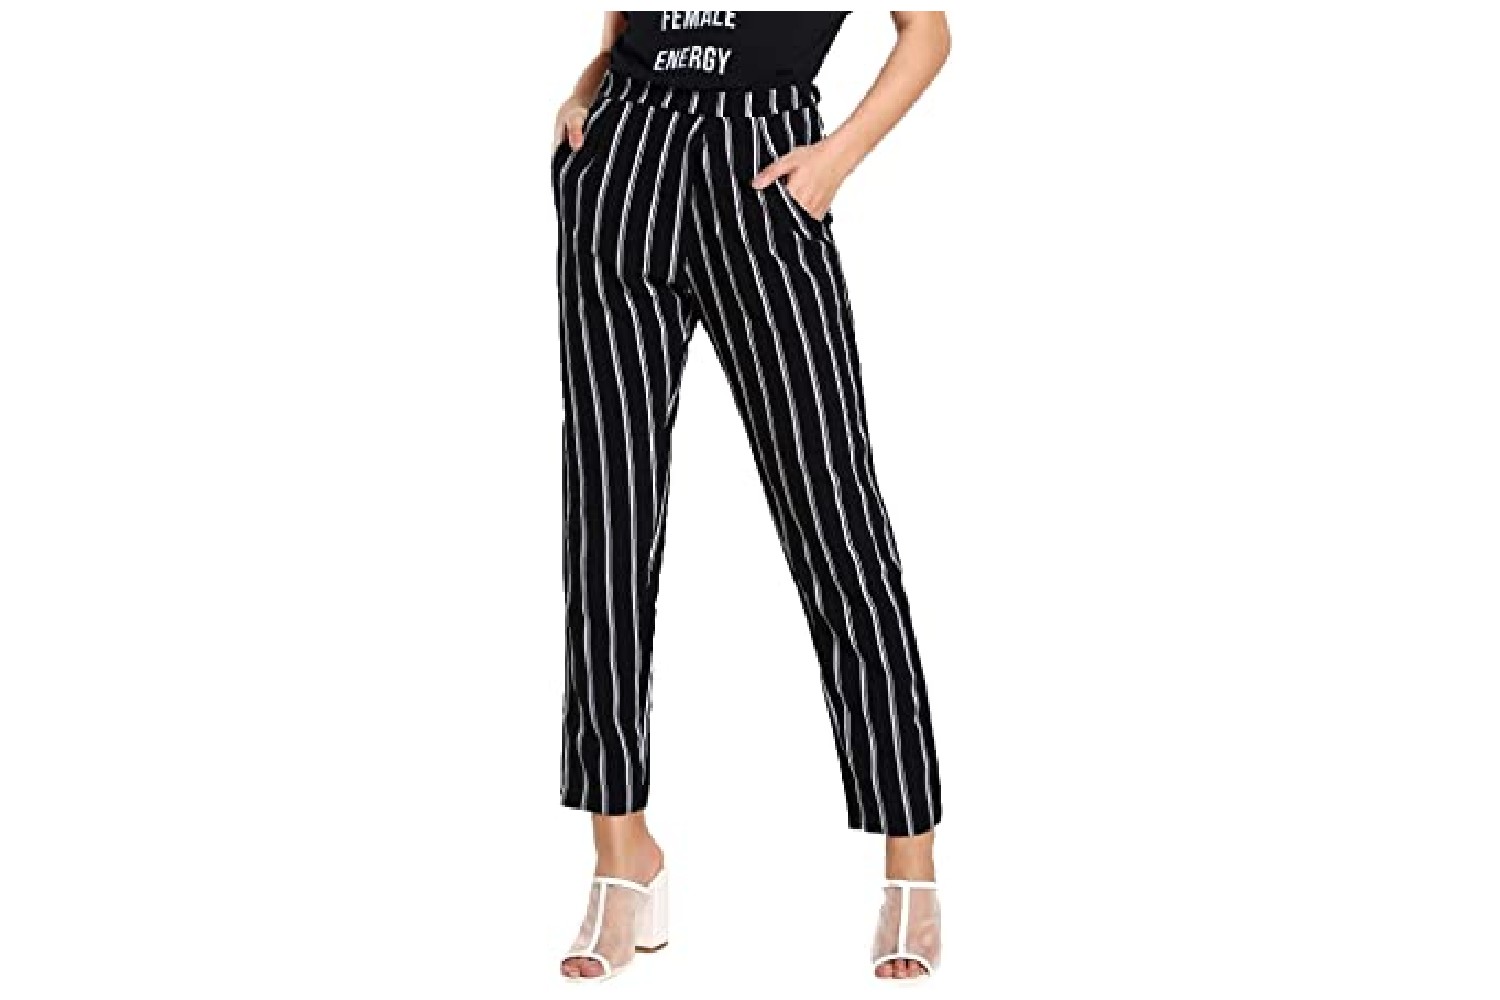 Striped Pant Outfits  22 Best Ways To Wear Striped Pants